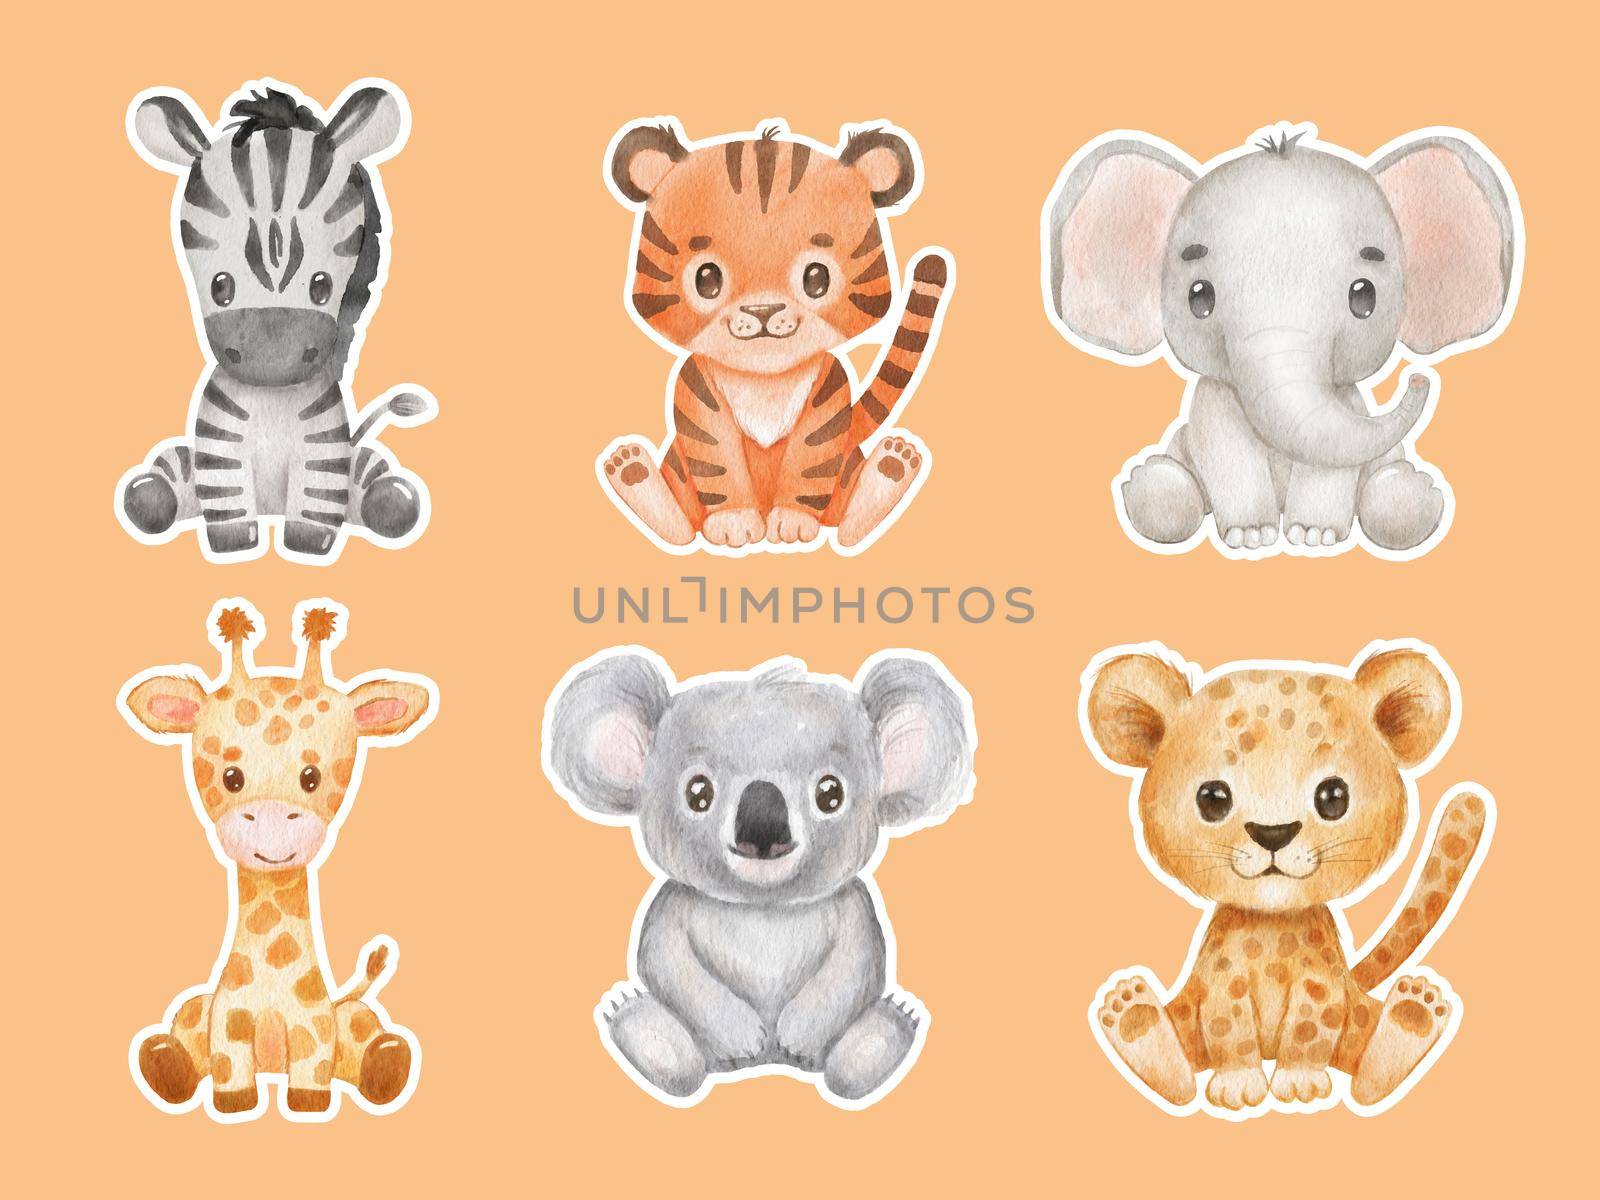 Hand drawn stickers. Cute portraits tiger, koala, elephant in cartoon style. Drawing african baby zebra and giraffe isolated on white background. Set of sitting Jungle animals